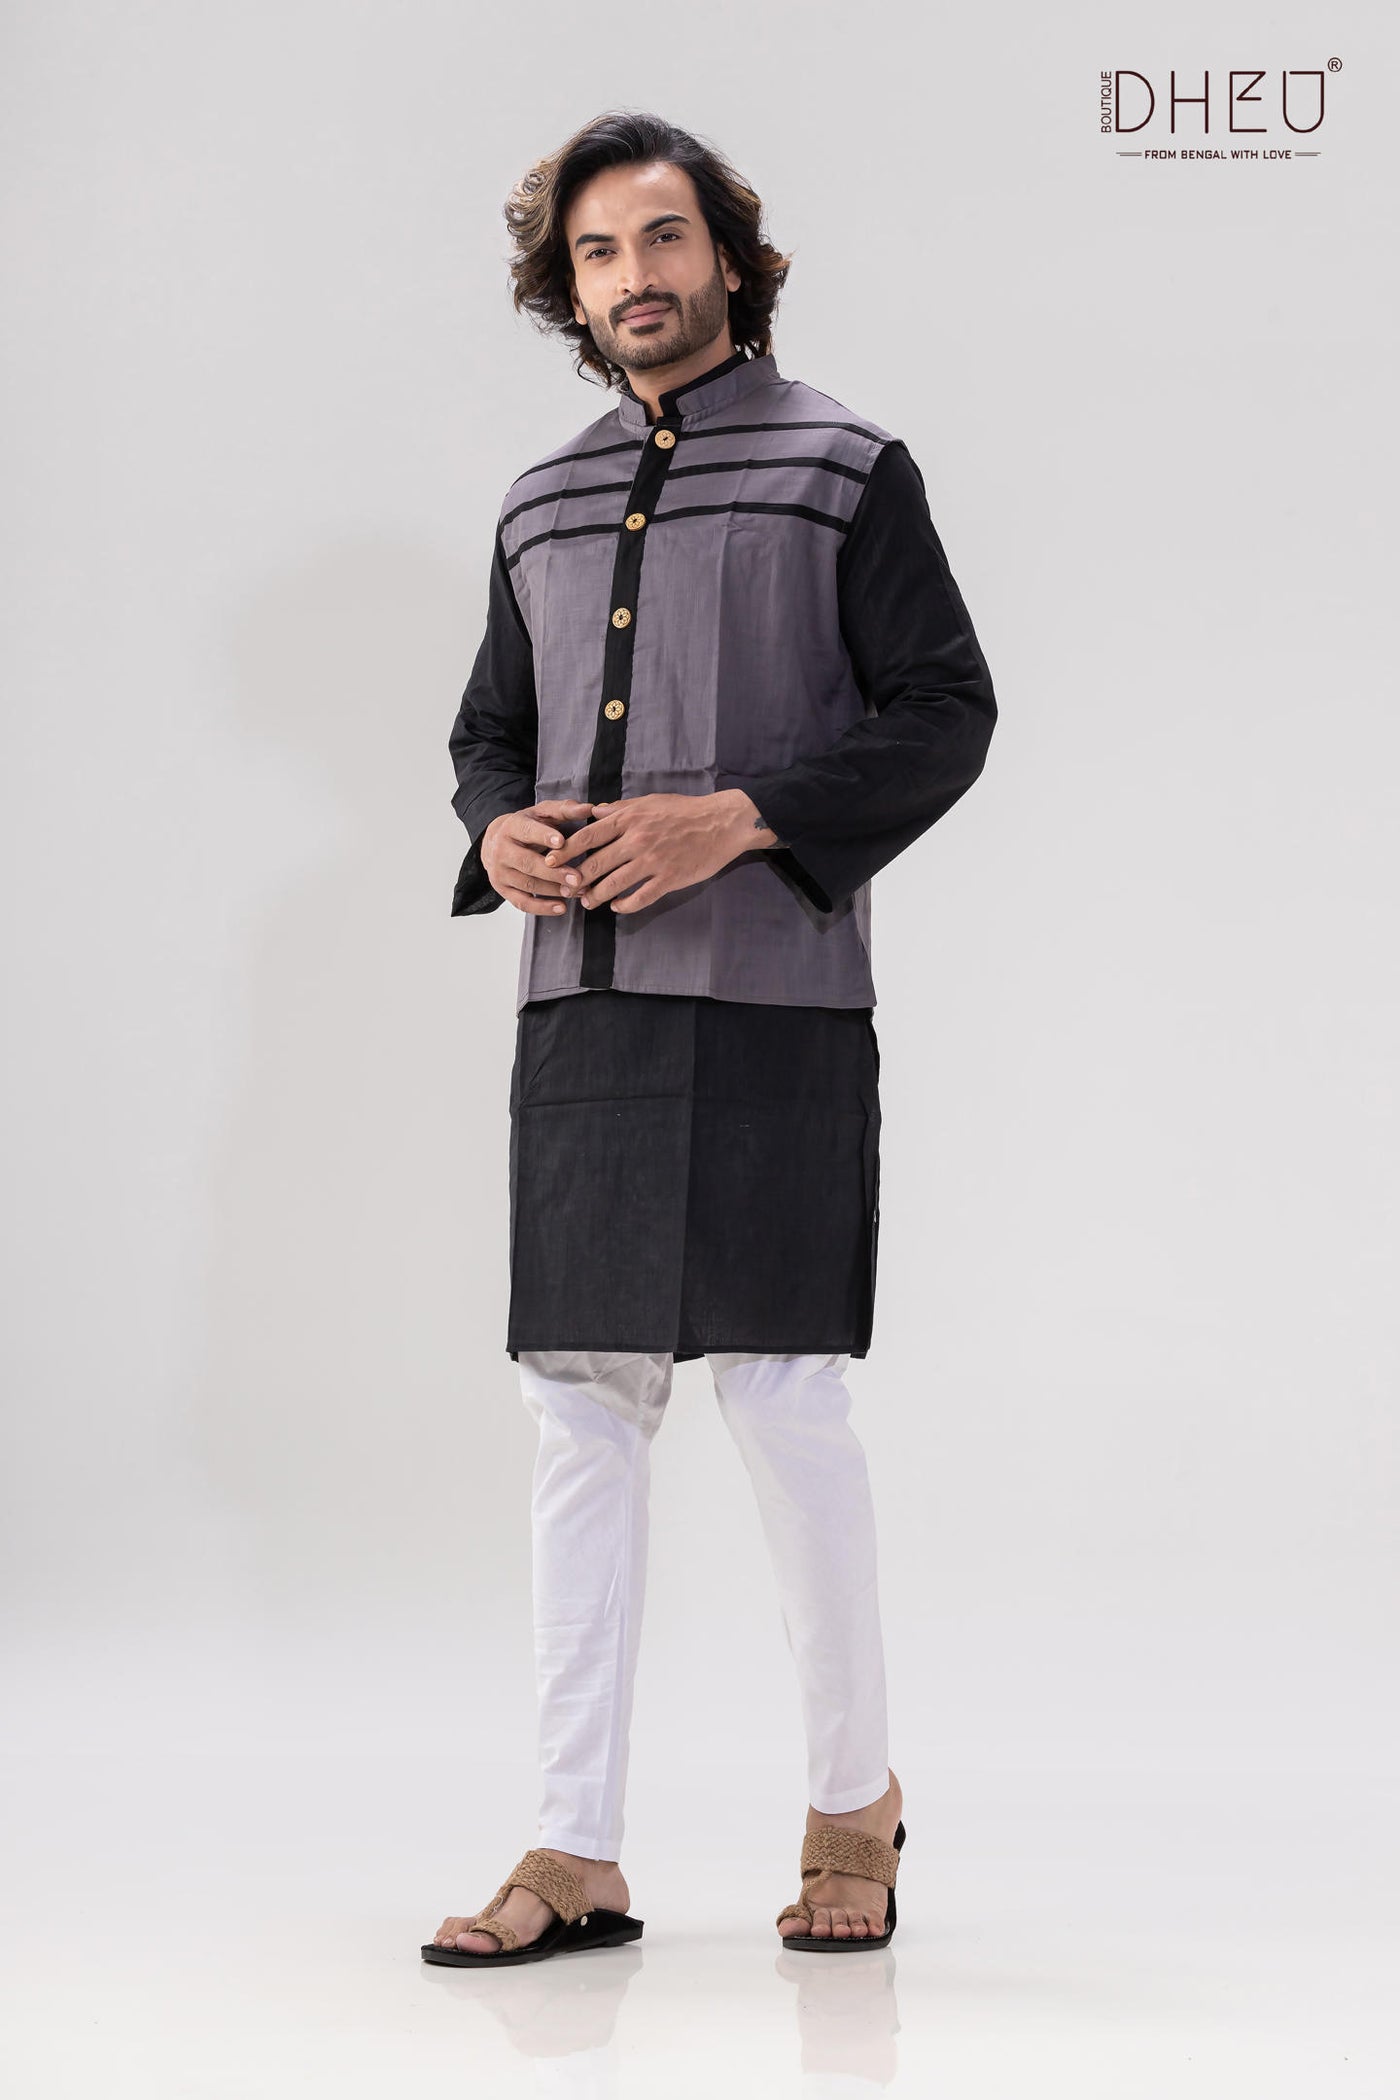 The designer , sophisticate grey jacket with black kurta at low cost only in dheu.in